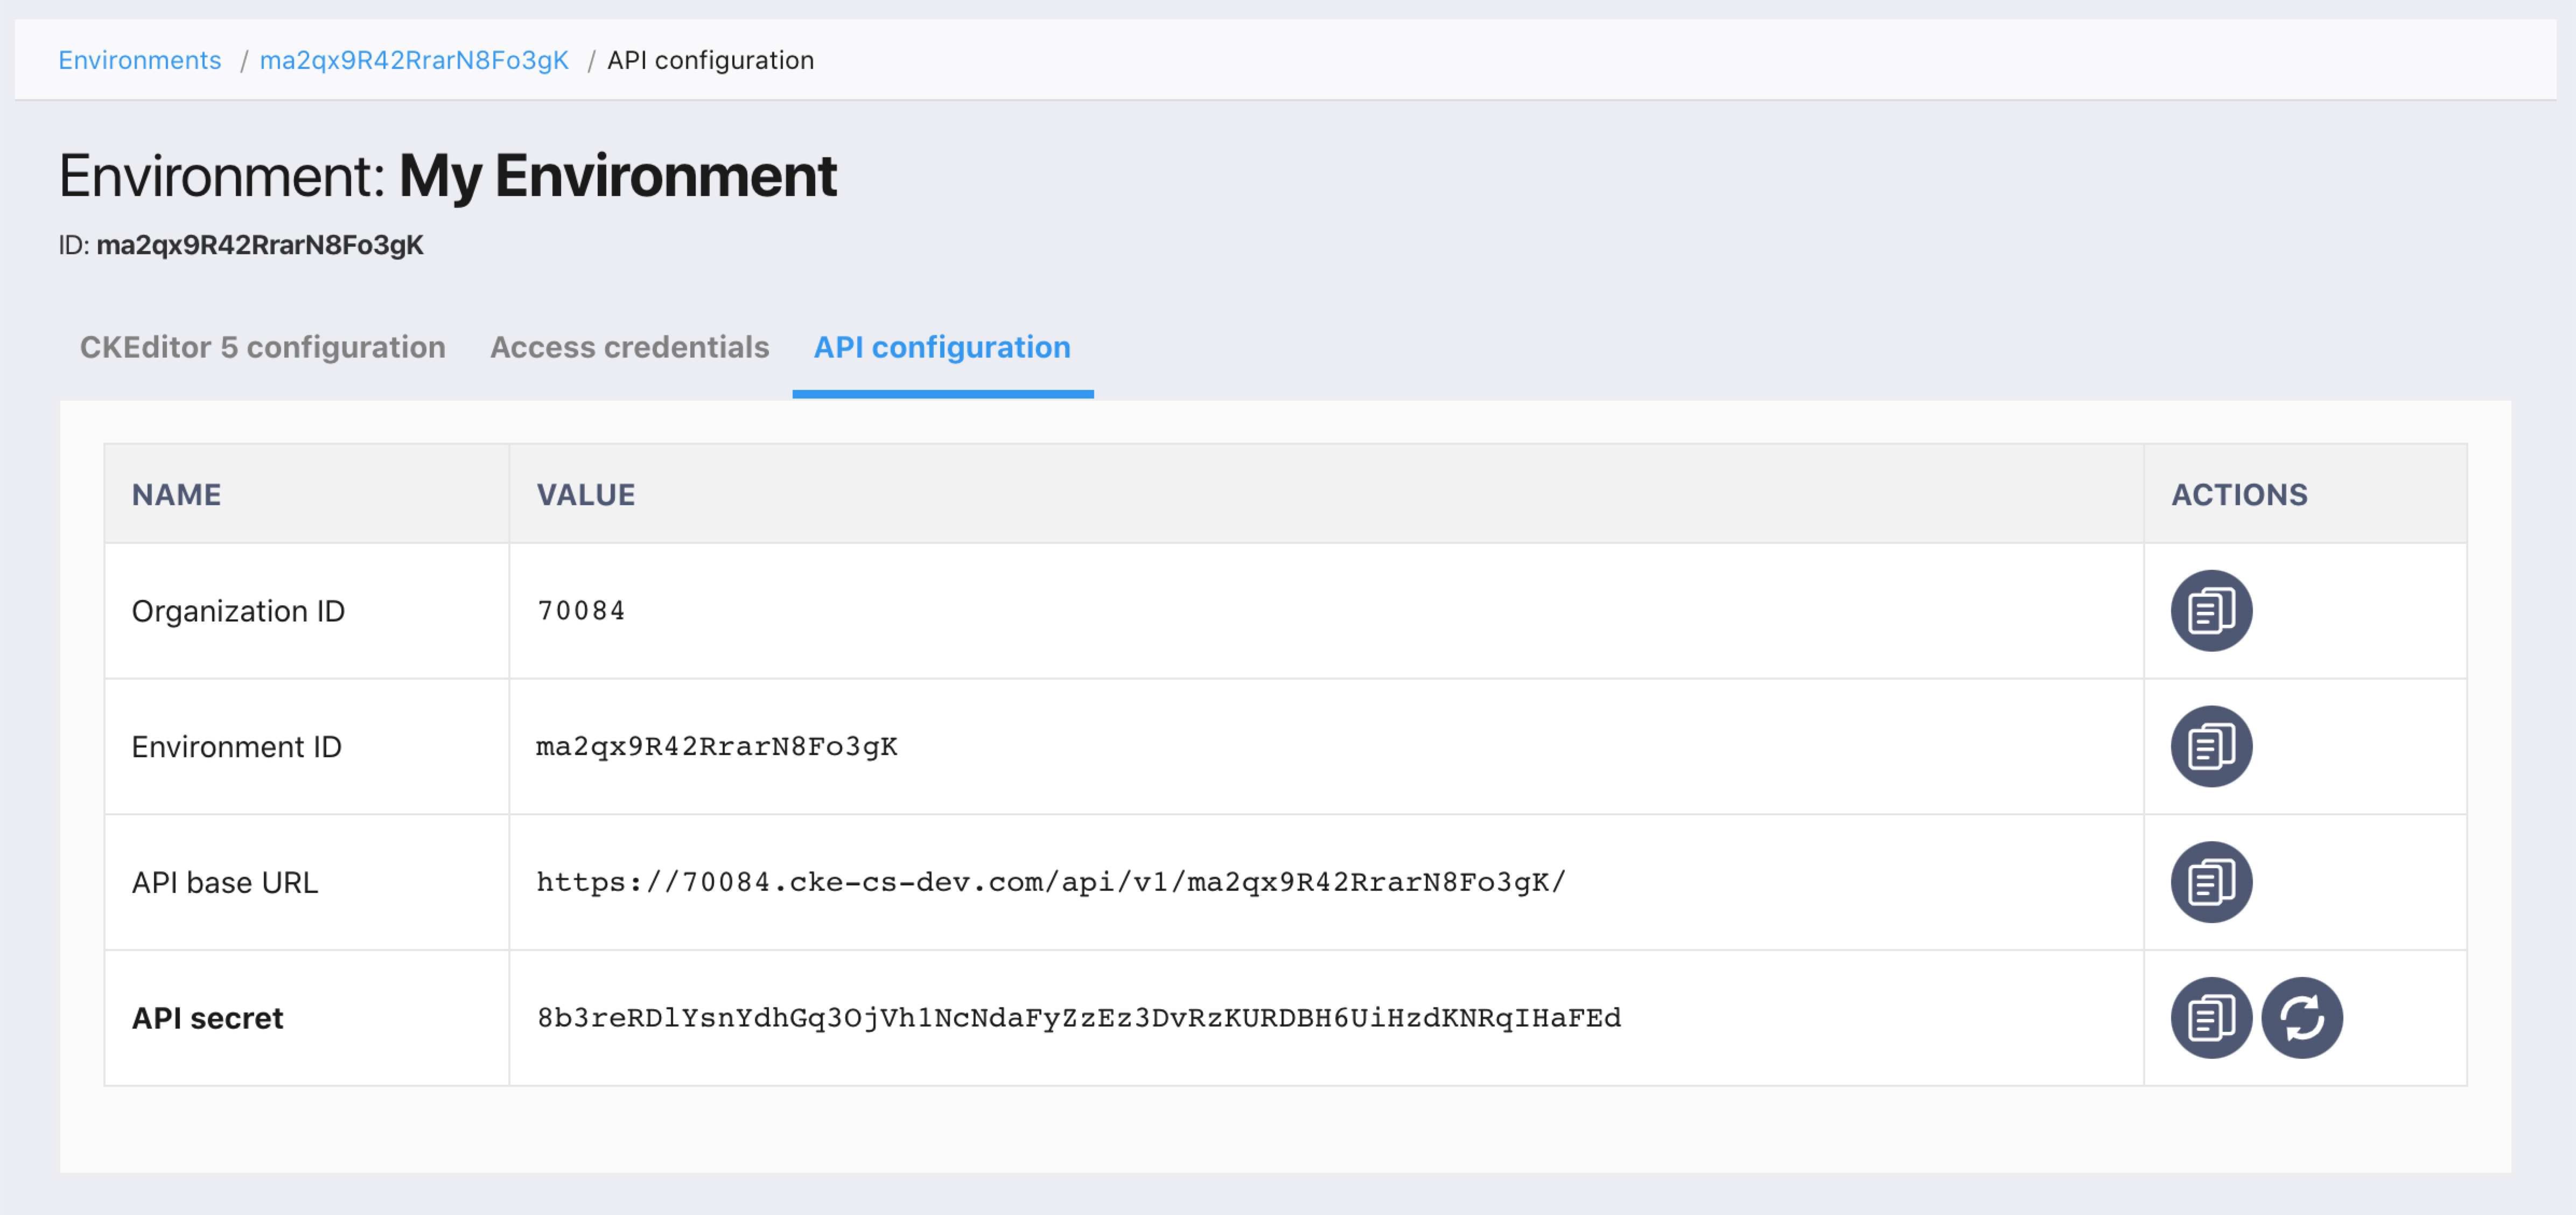 The API configuration section with the newly created API secret displayed.